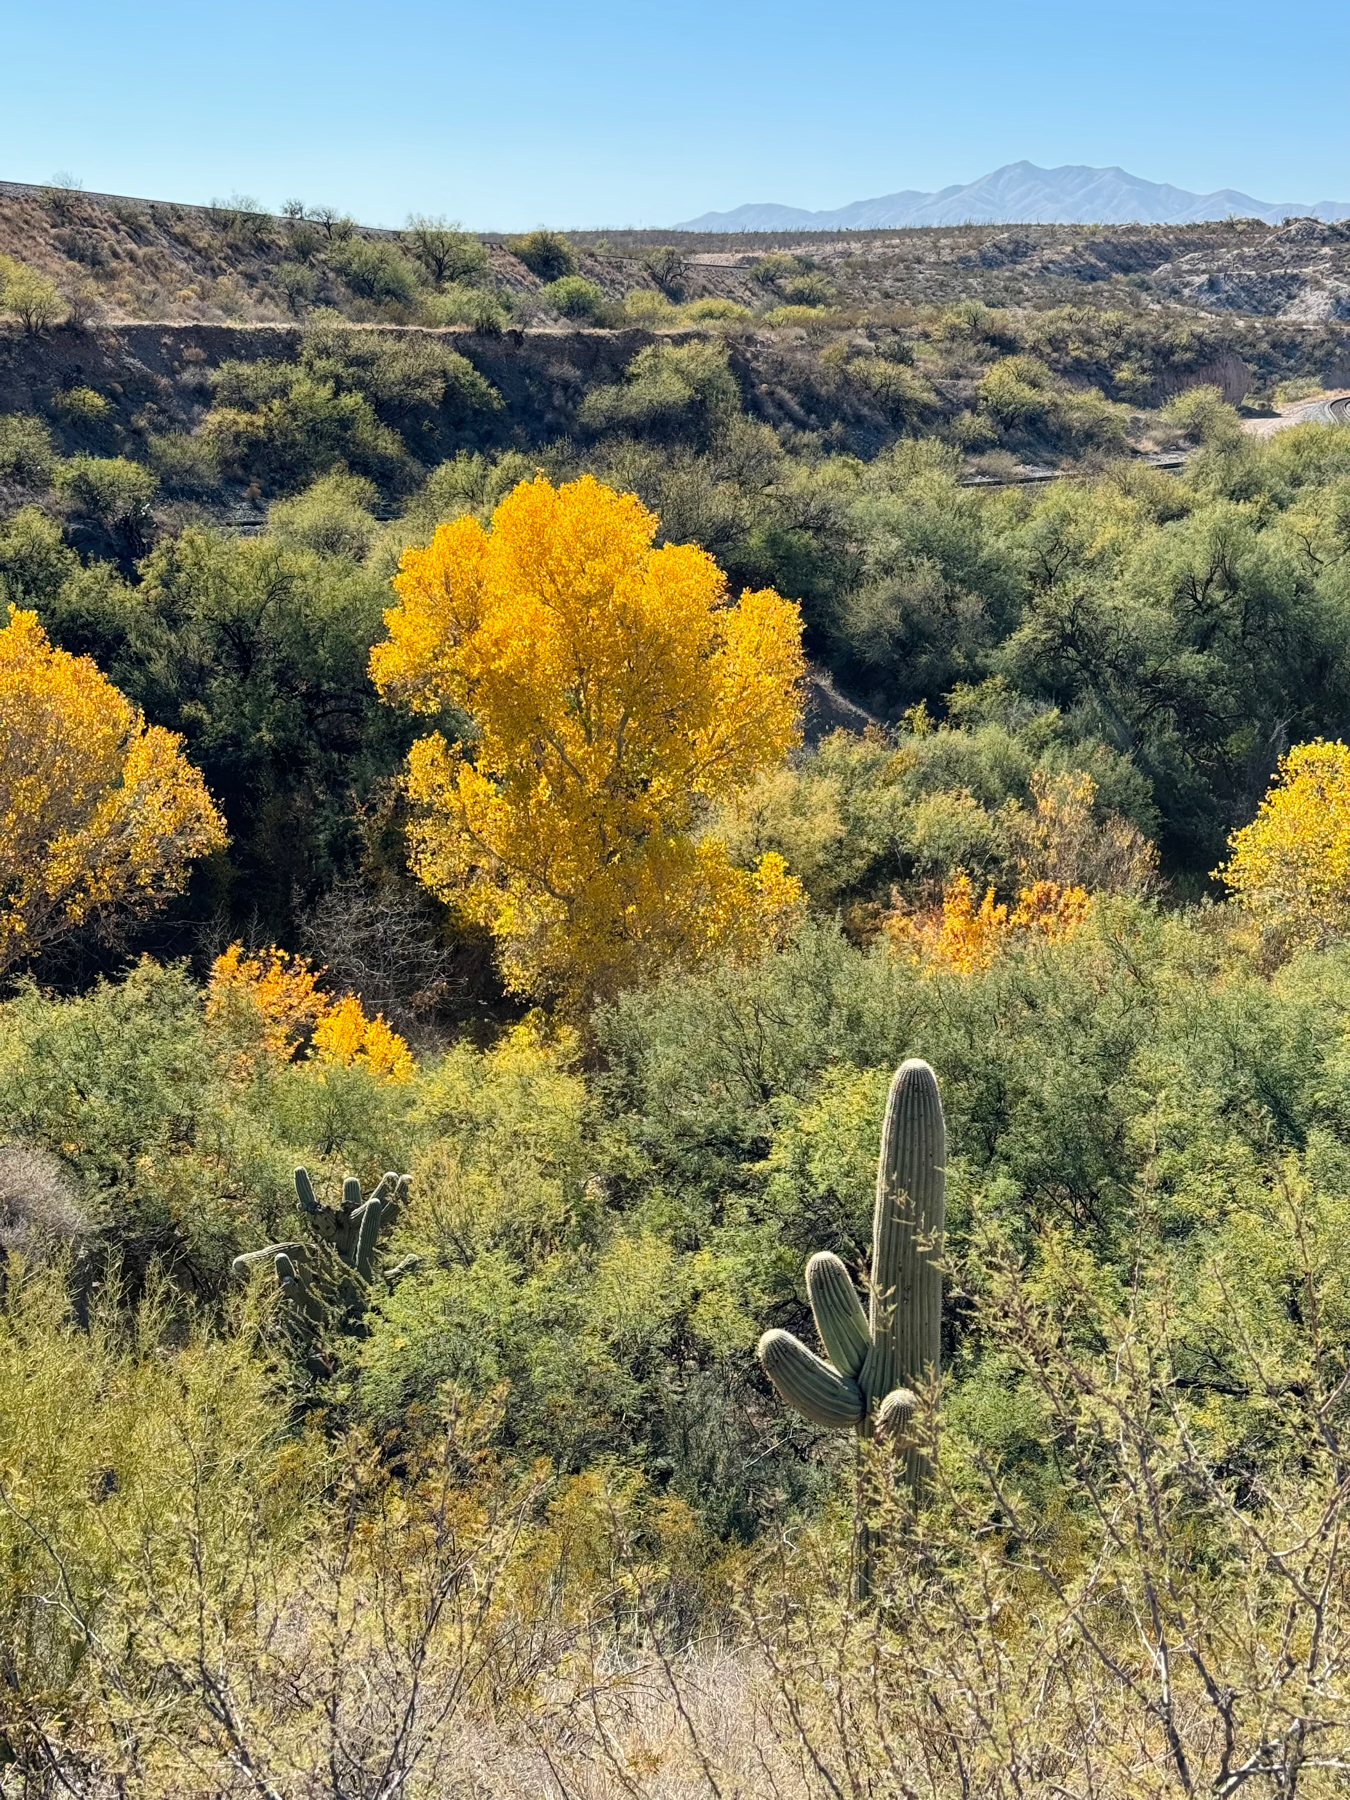 Autumn foliage with yellow leaves stands out among green shrubs against a backdrop of distant mountains and a clear blue sky, with saguaro cacti dotting the foreground.